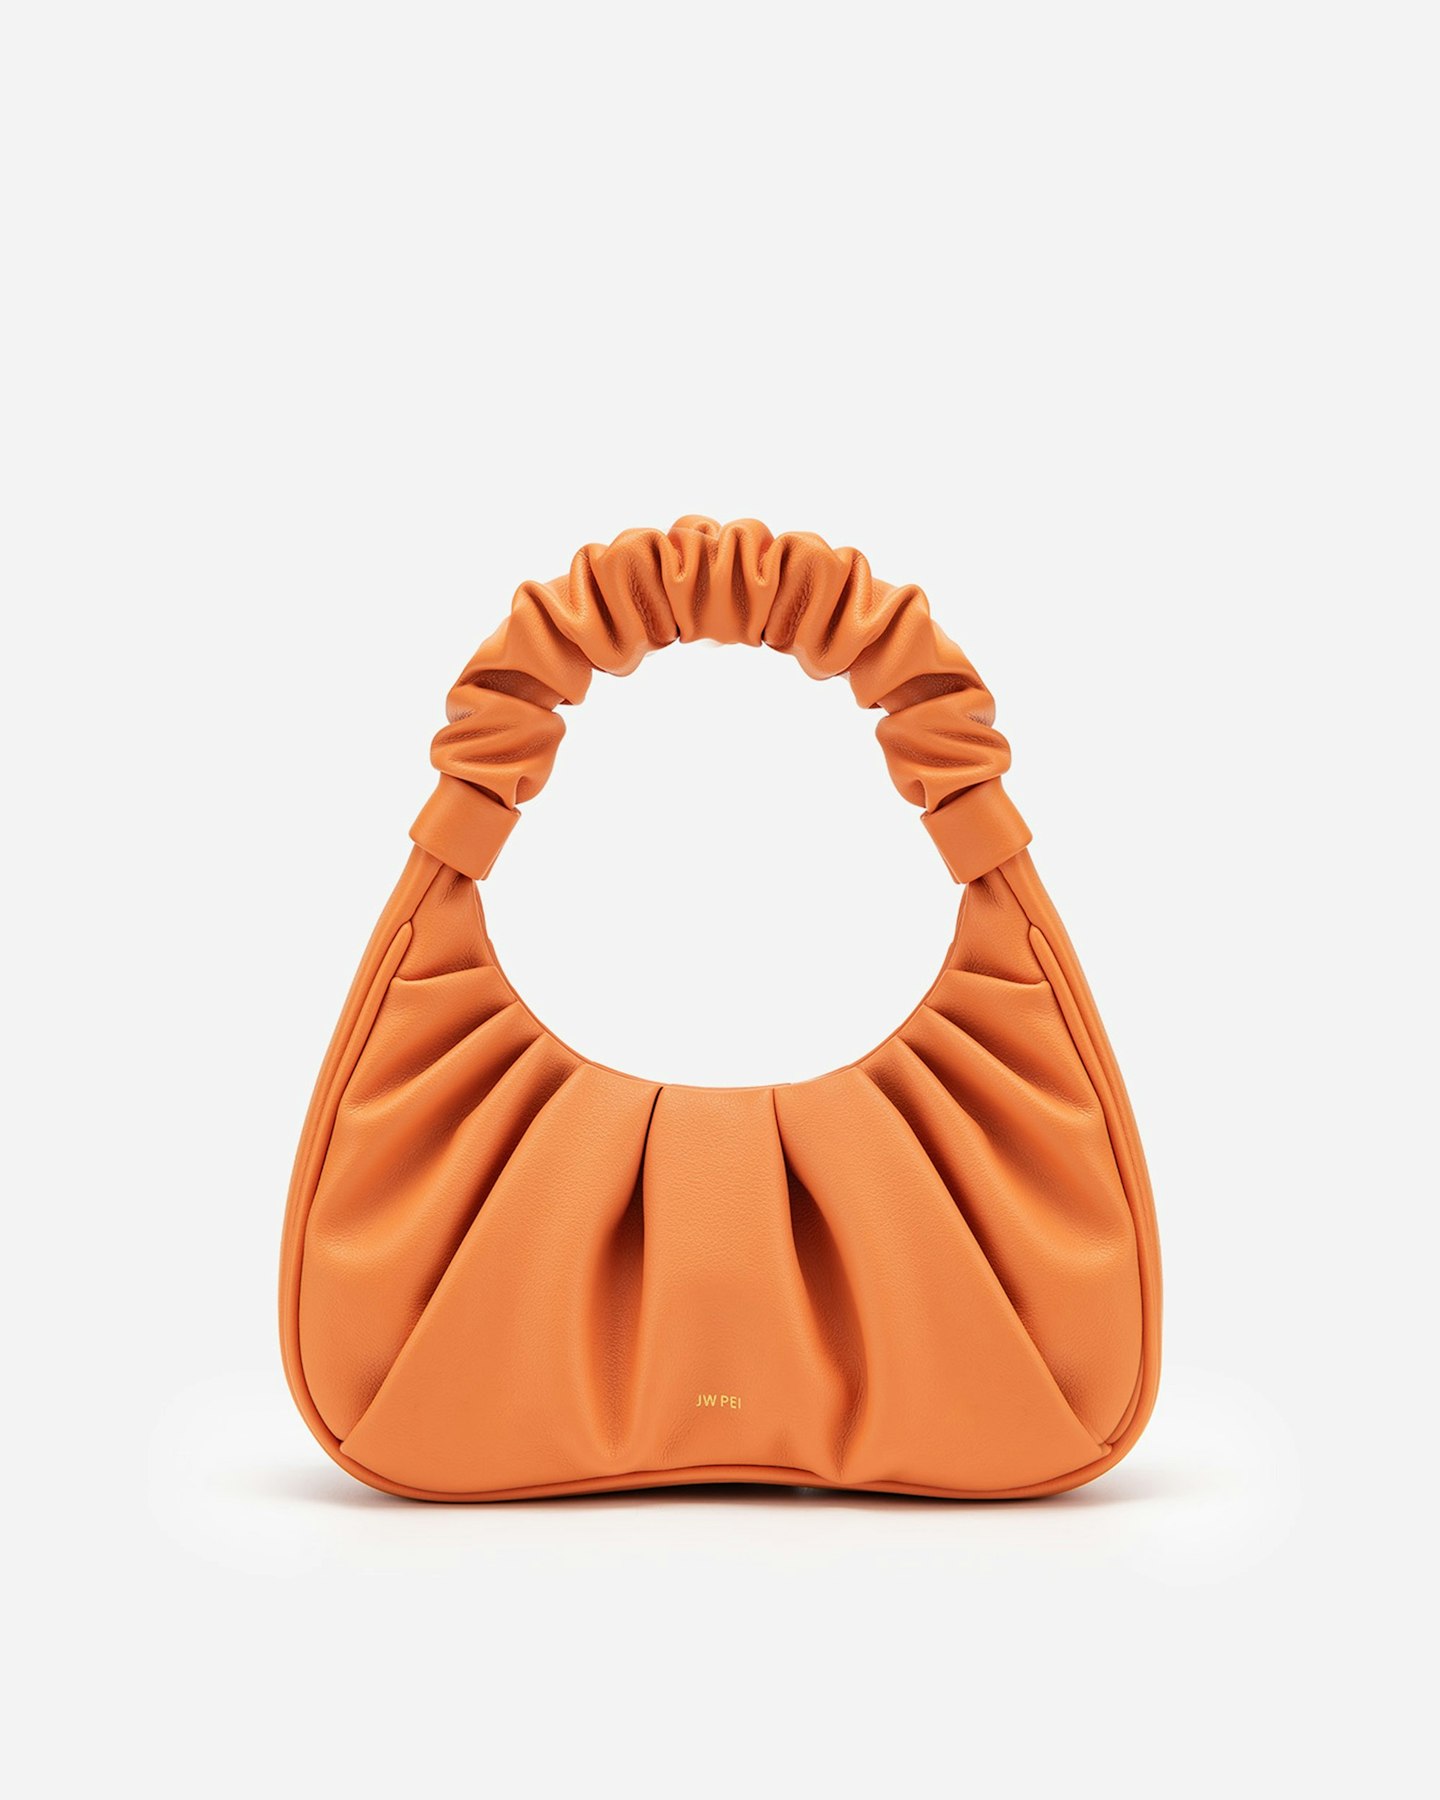 JW PEI Is The Affordable Accessories Label To Covet